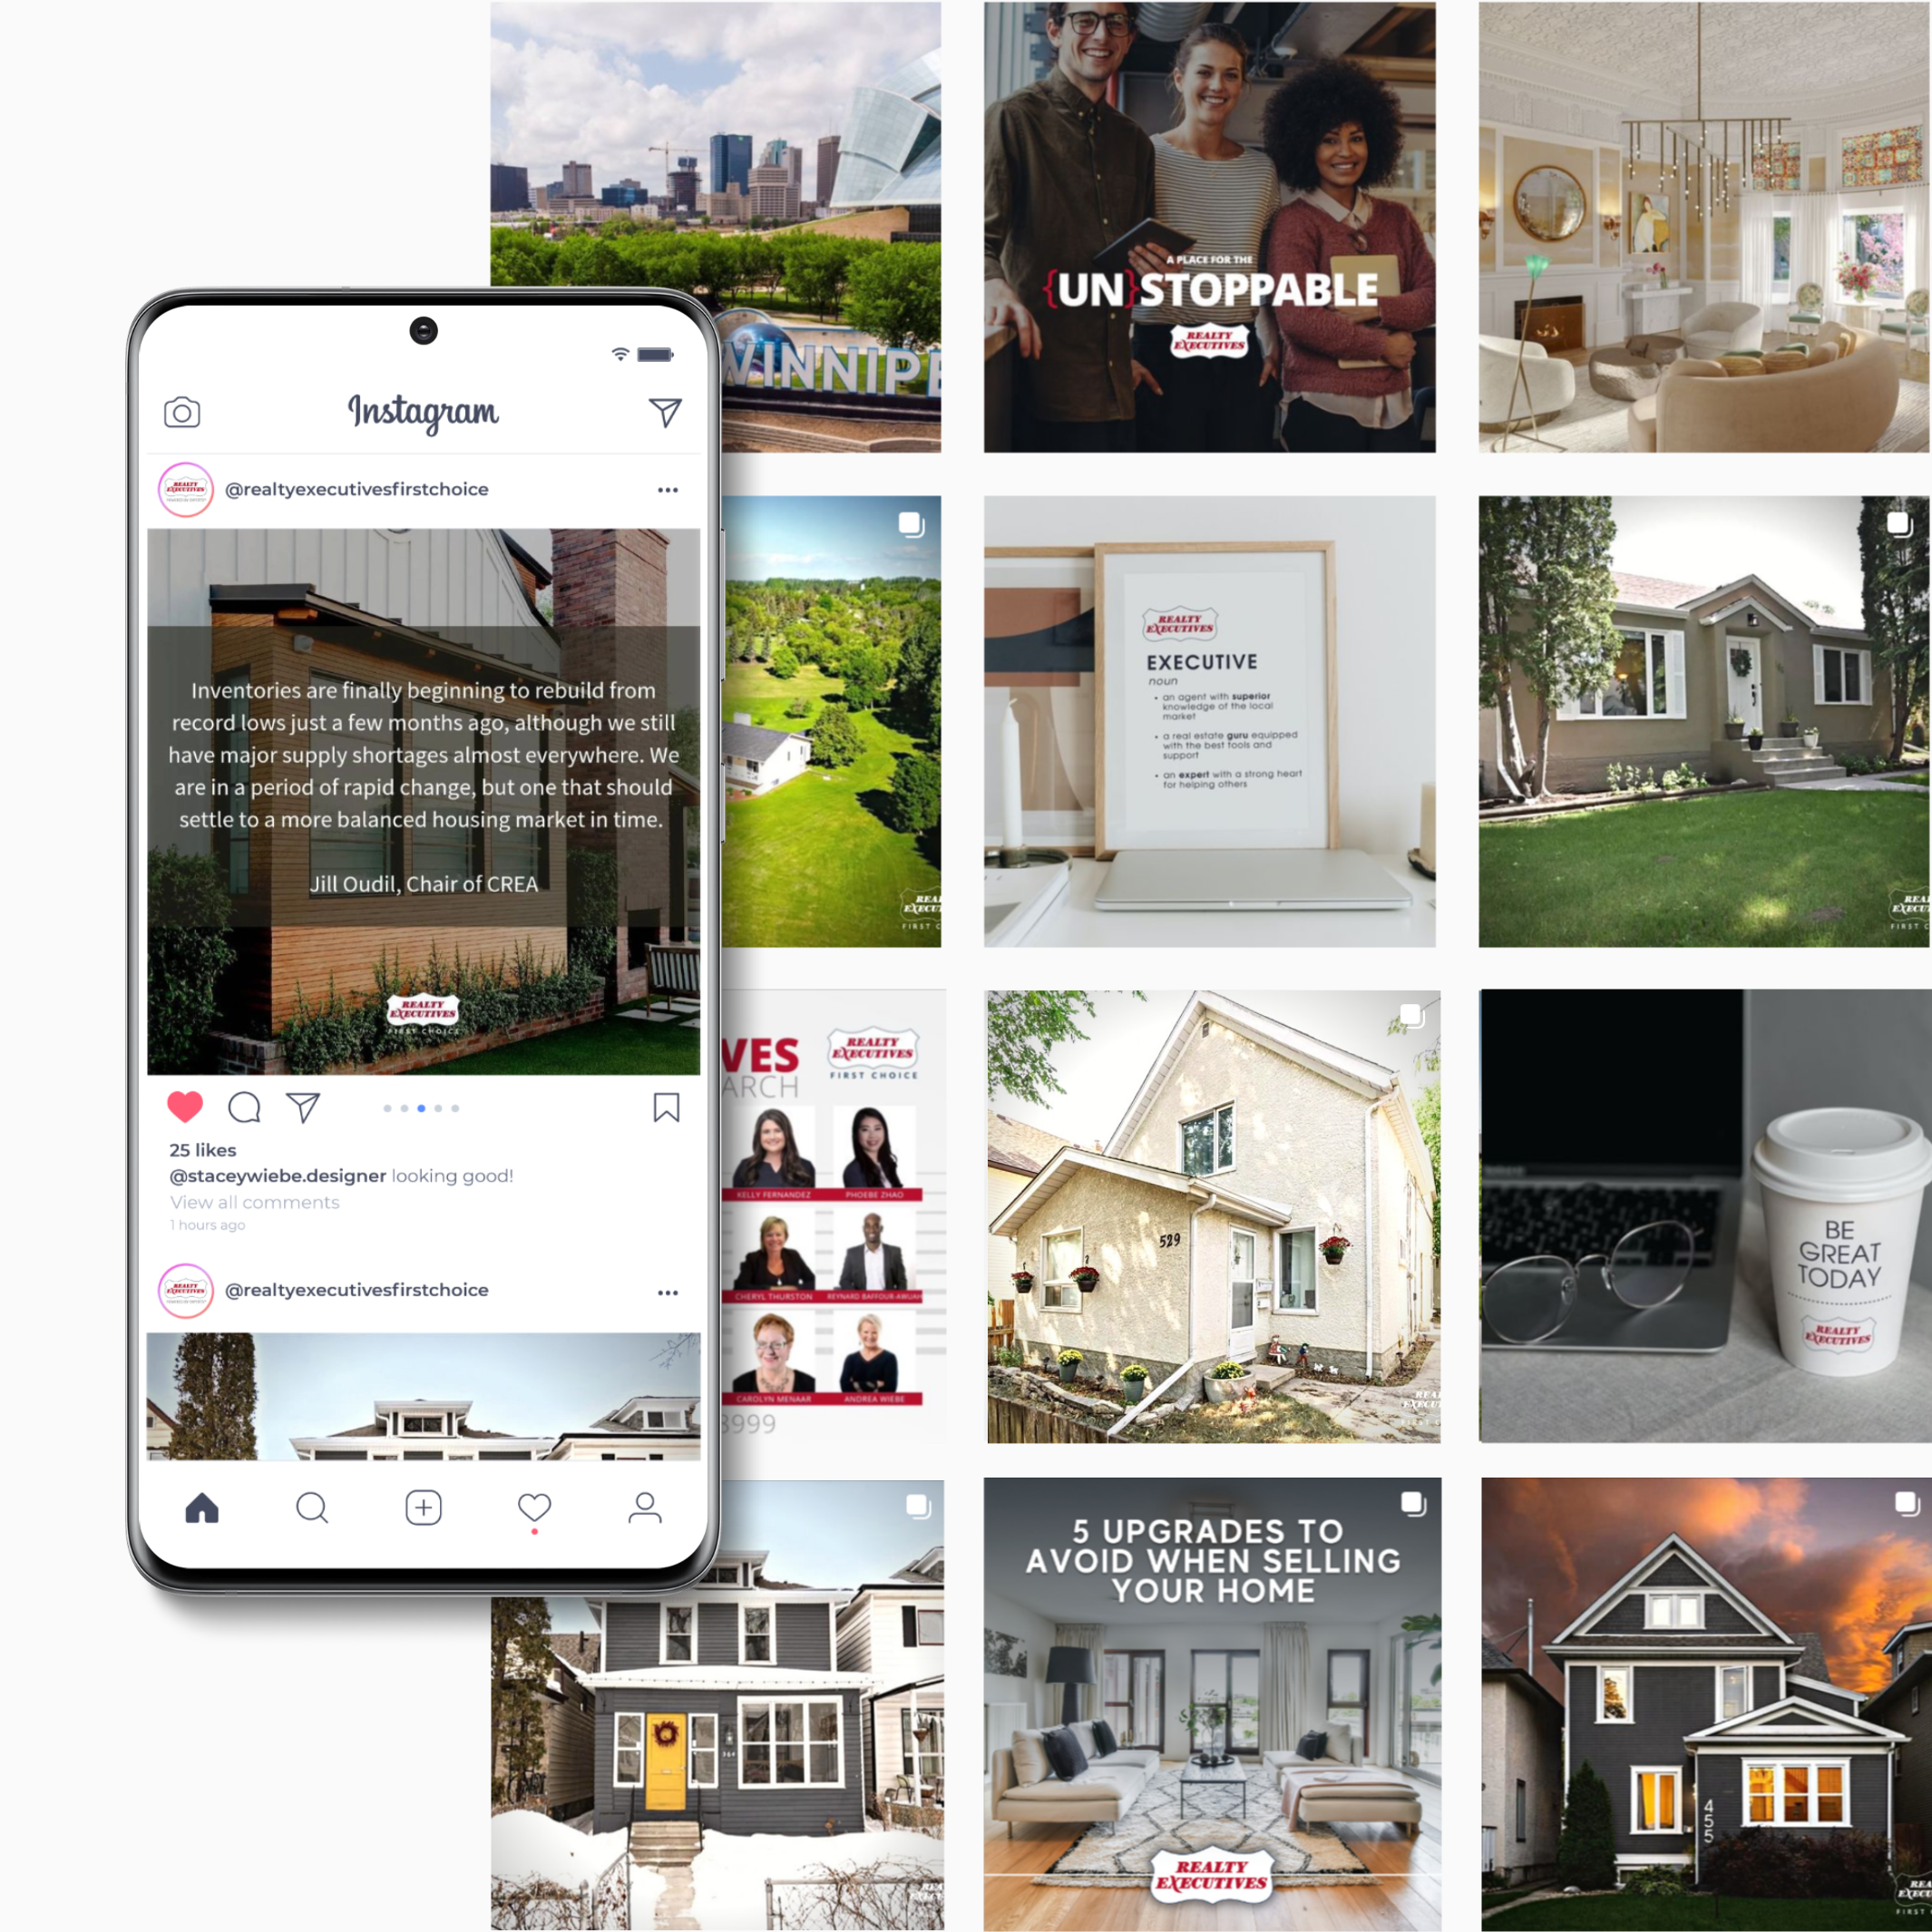 Realty Executives First Choice curated social media feed